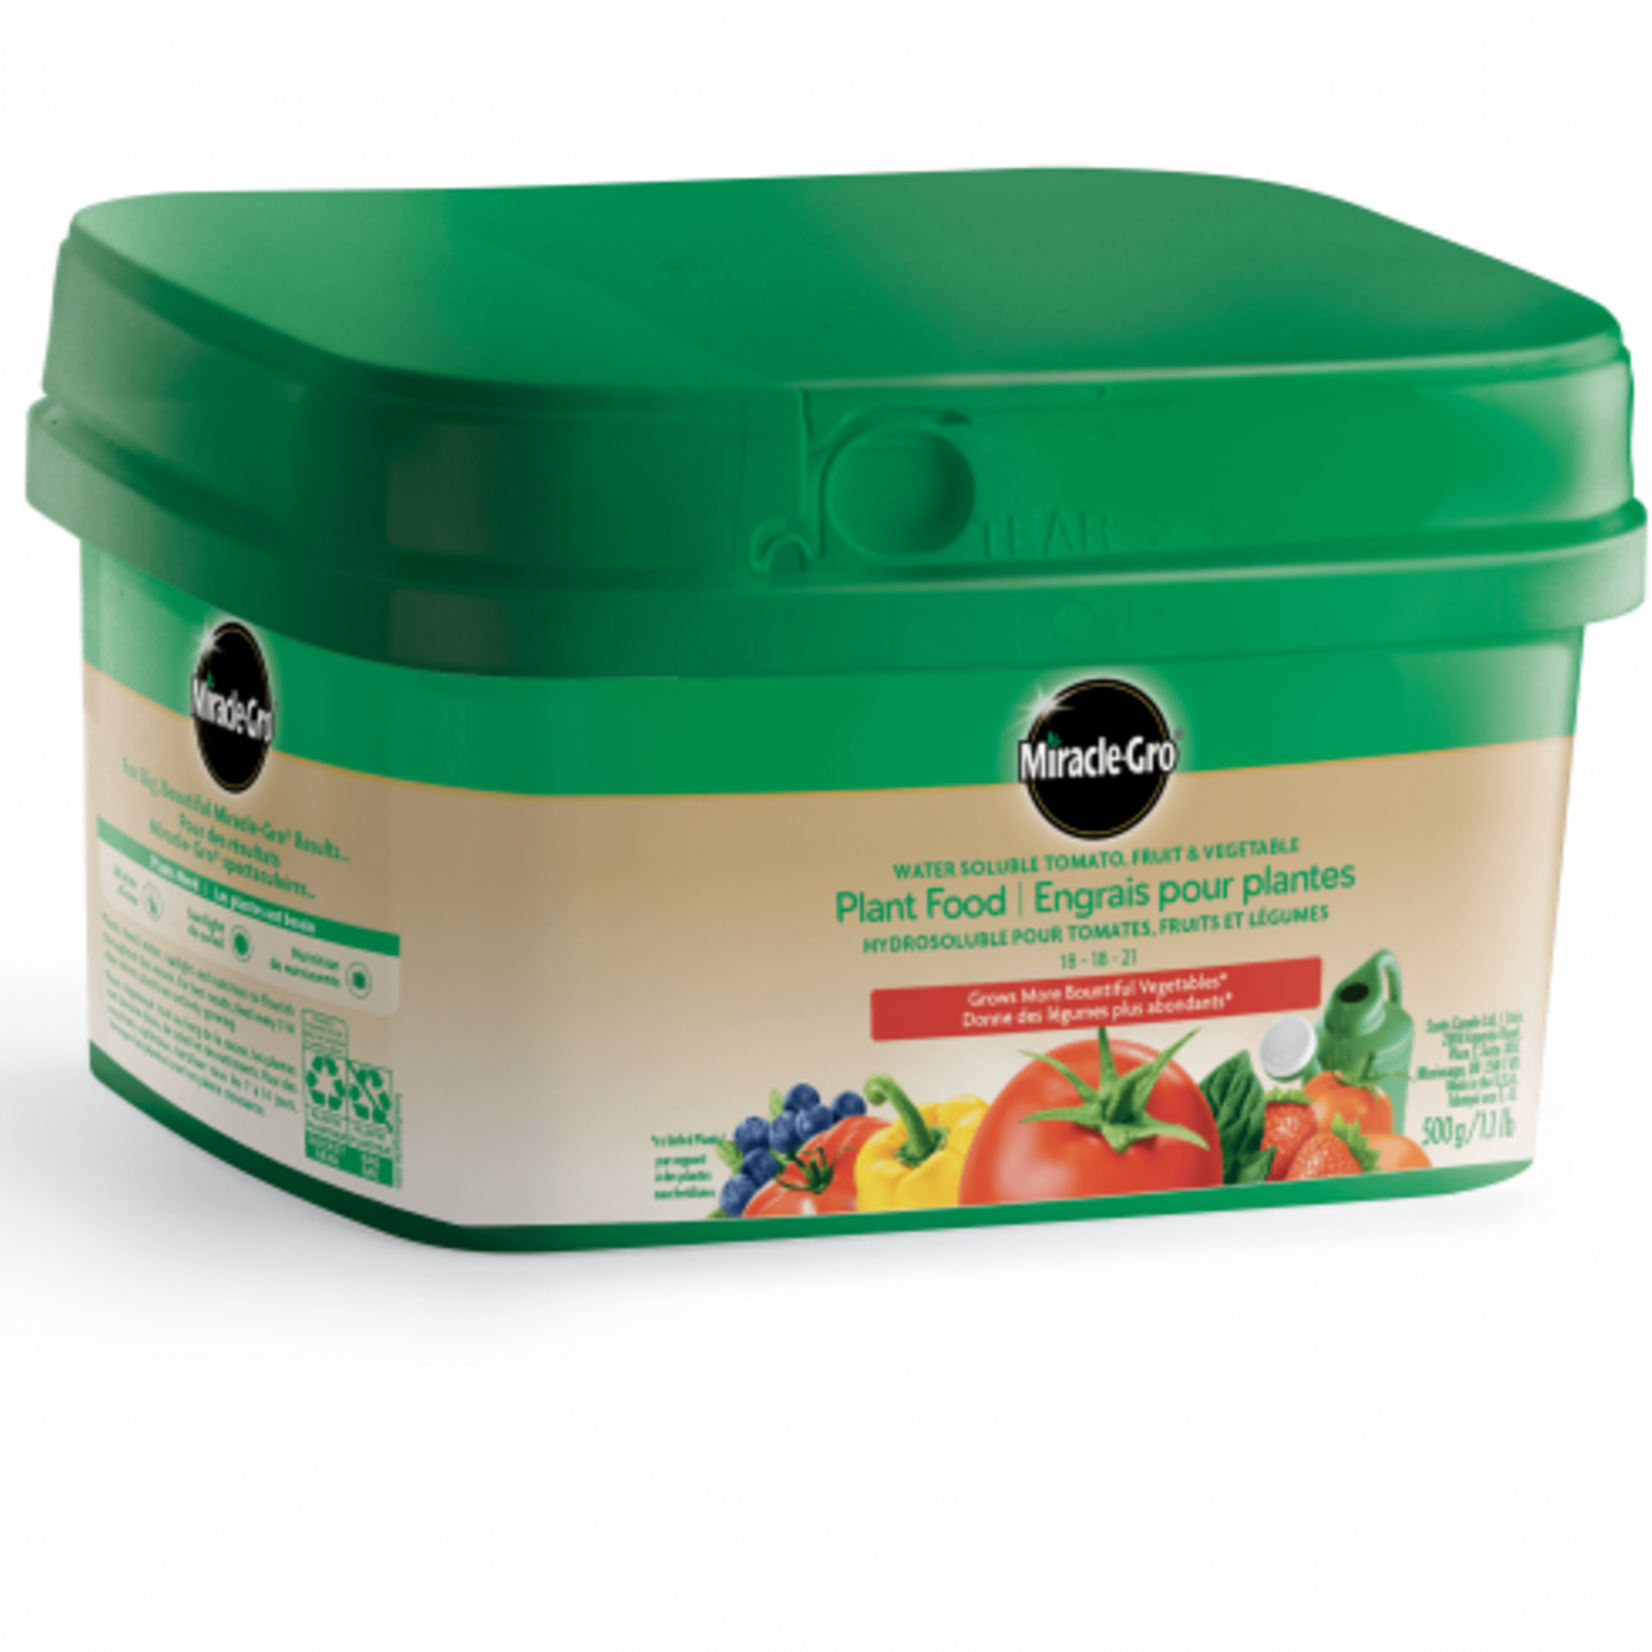 Miracle Gro Miracle-Gro Water Soluble Tomato, Fruit & Vegetable Plant Food 18-18-21 - 500g